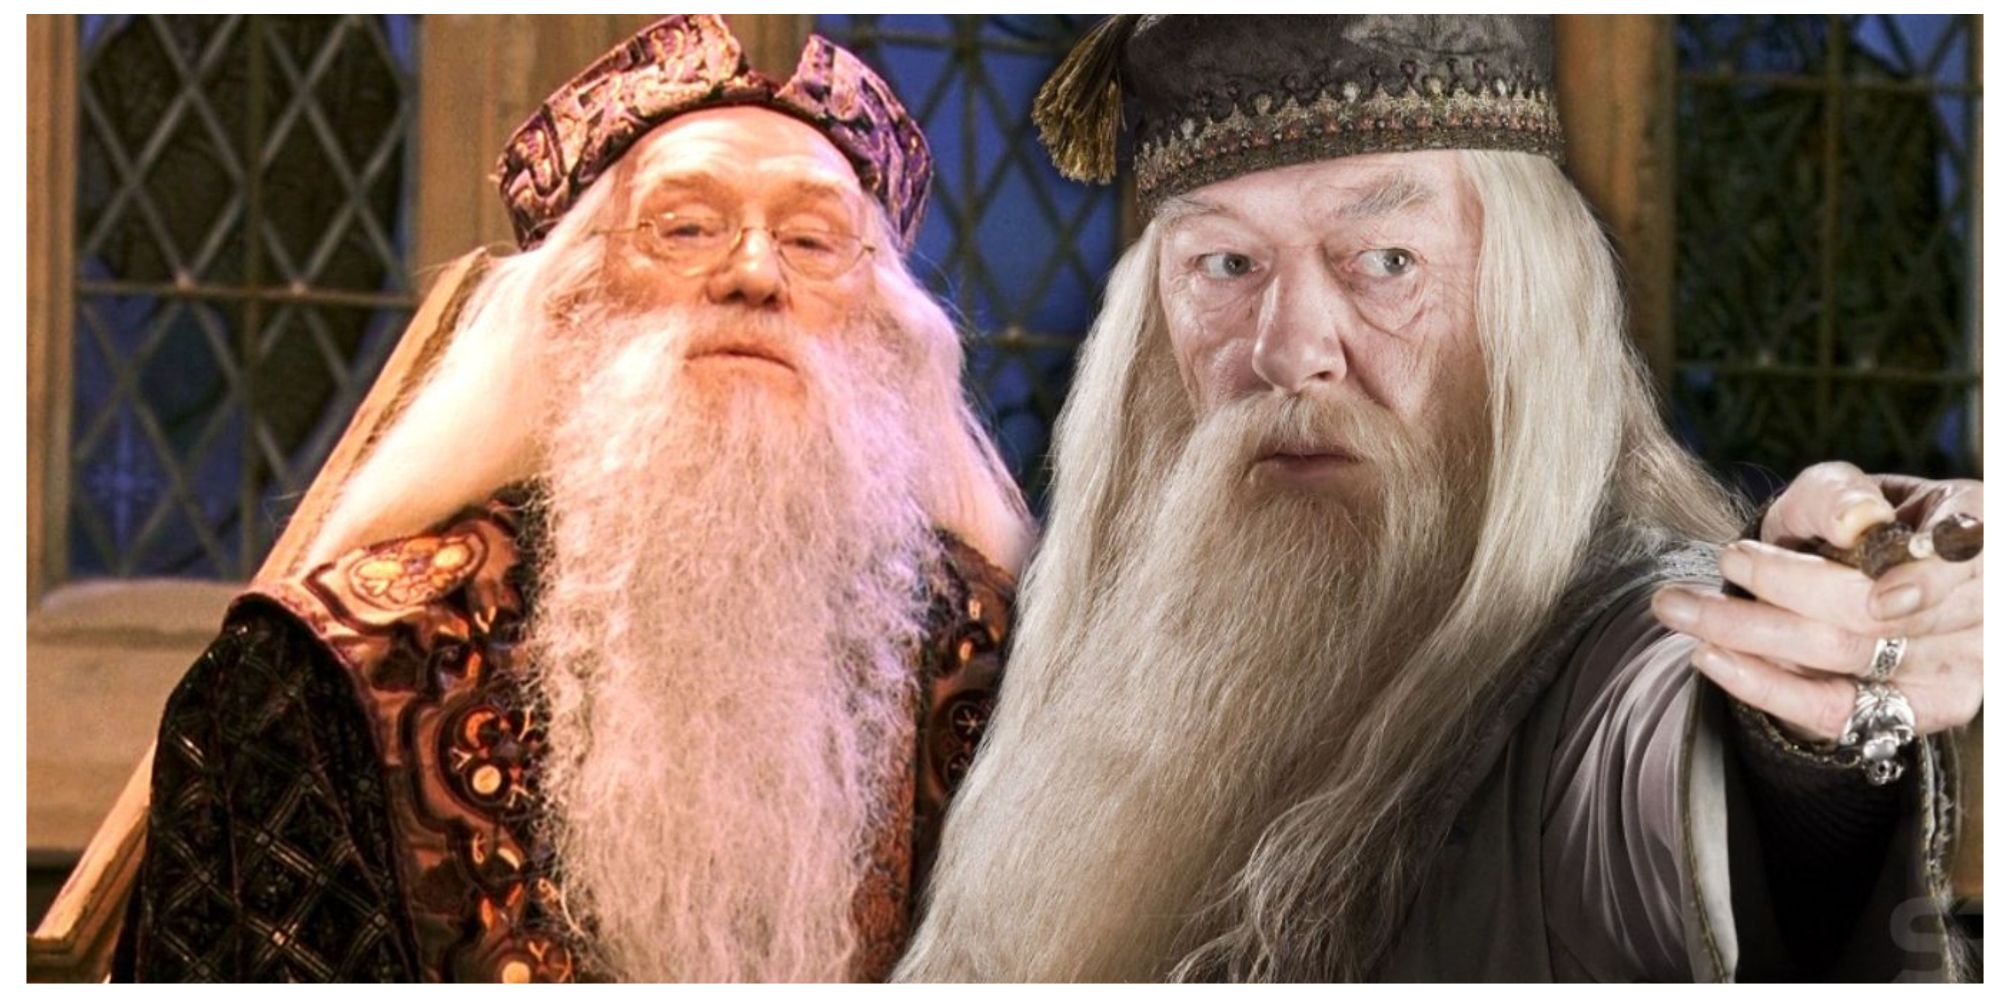 Richard Harris and Michael Gambon as Albus Dumbledore in the Harry Potter franchise